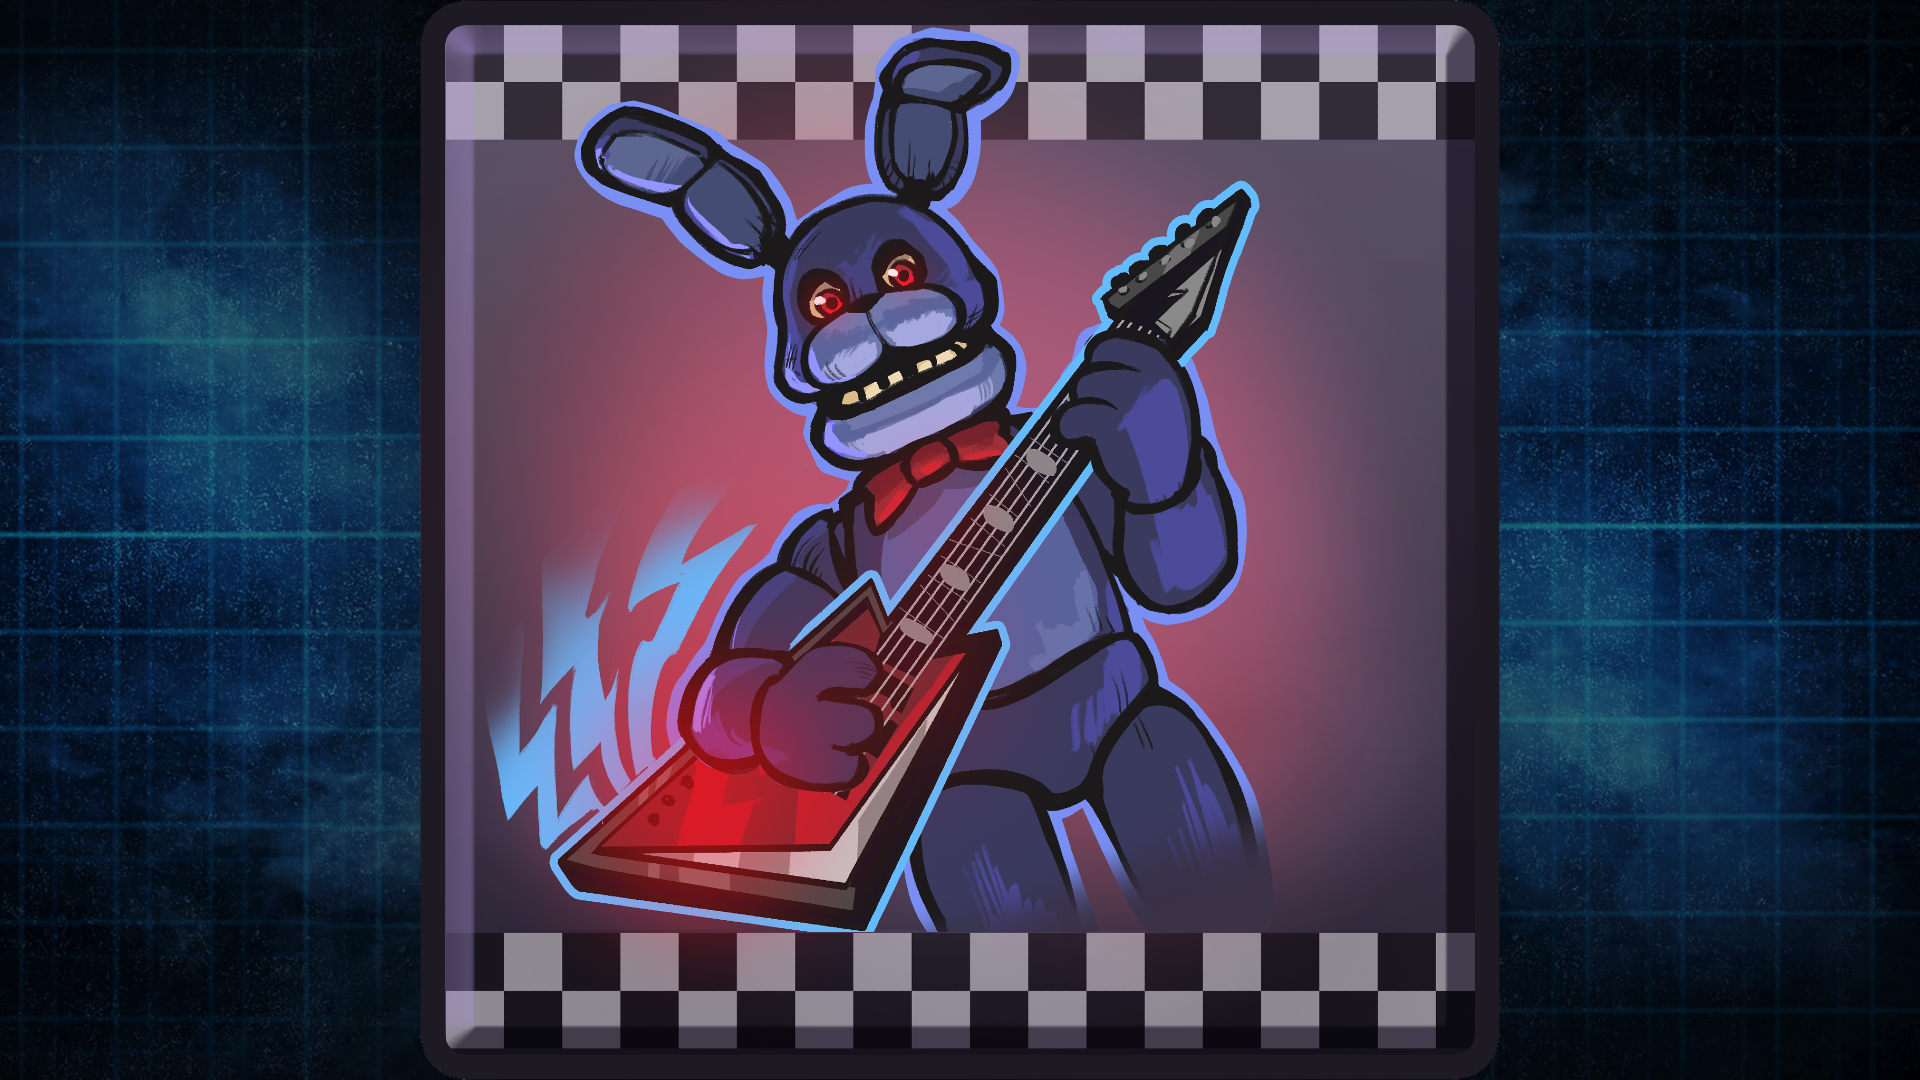 Icon for Rock!